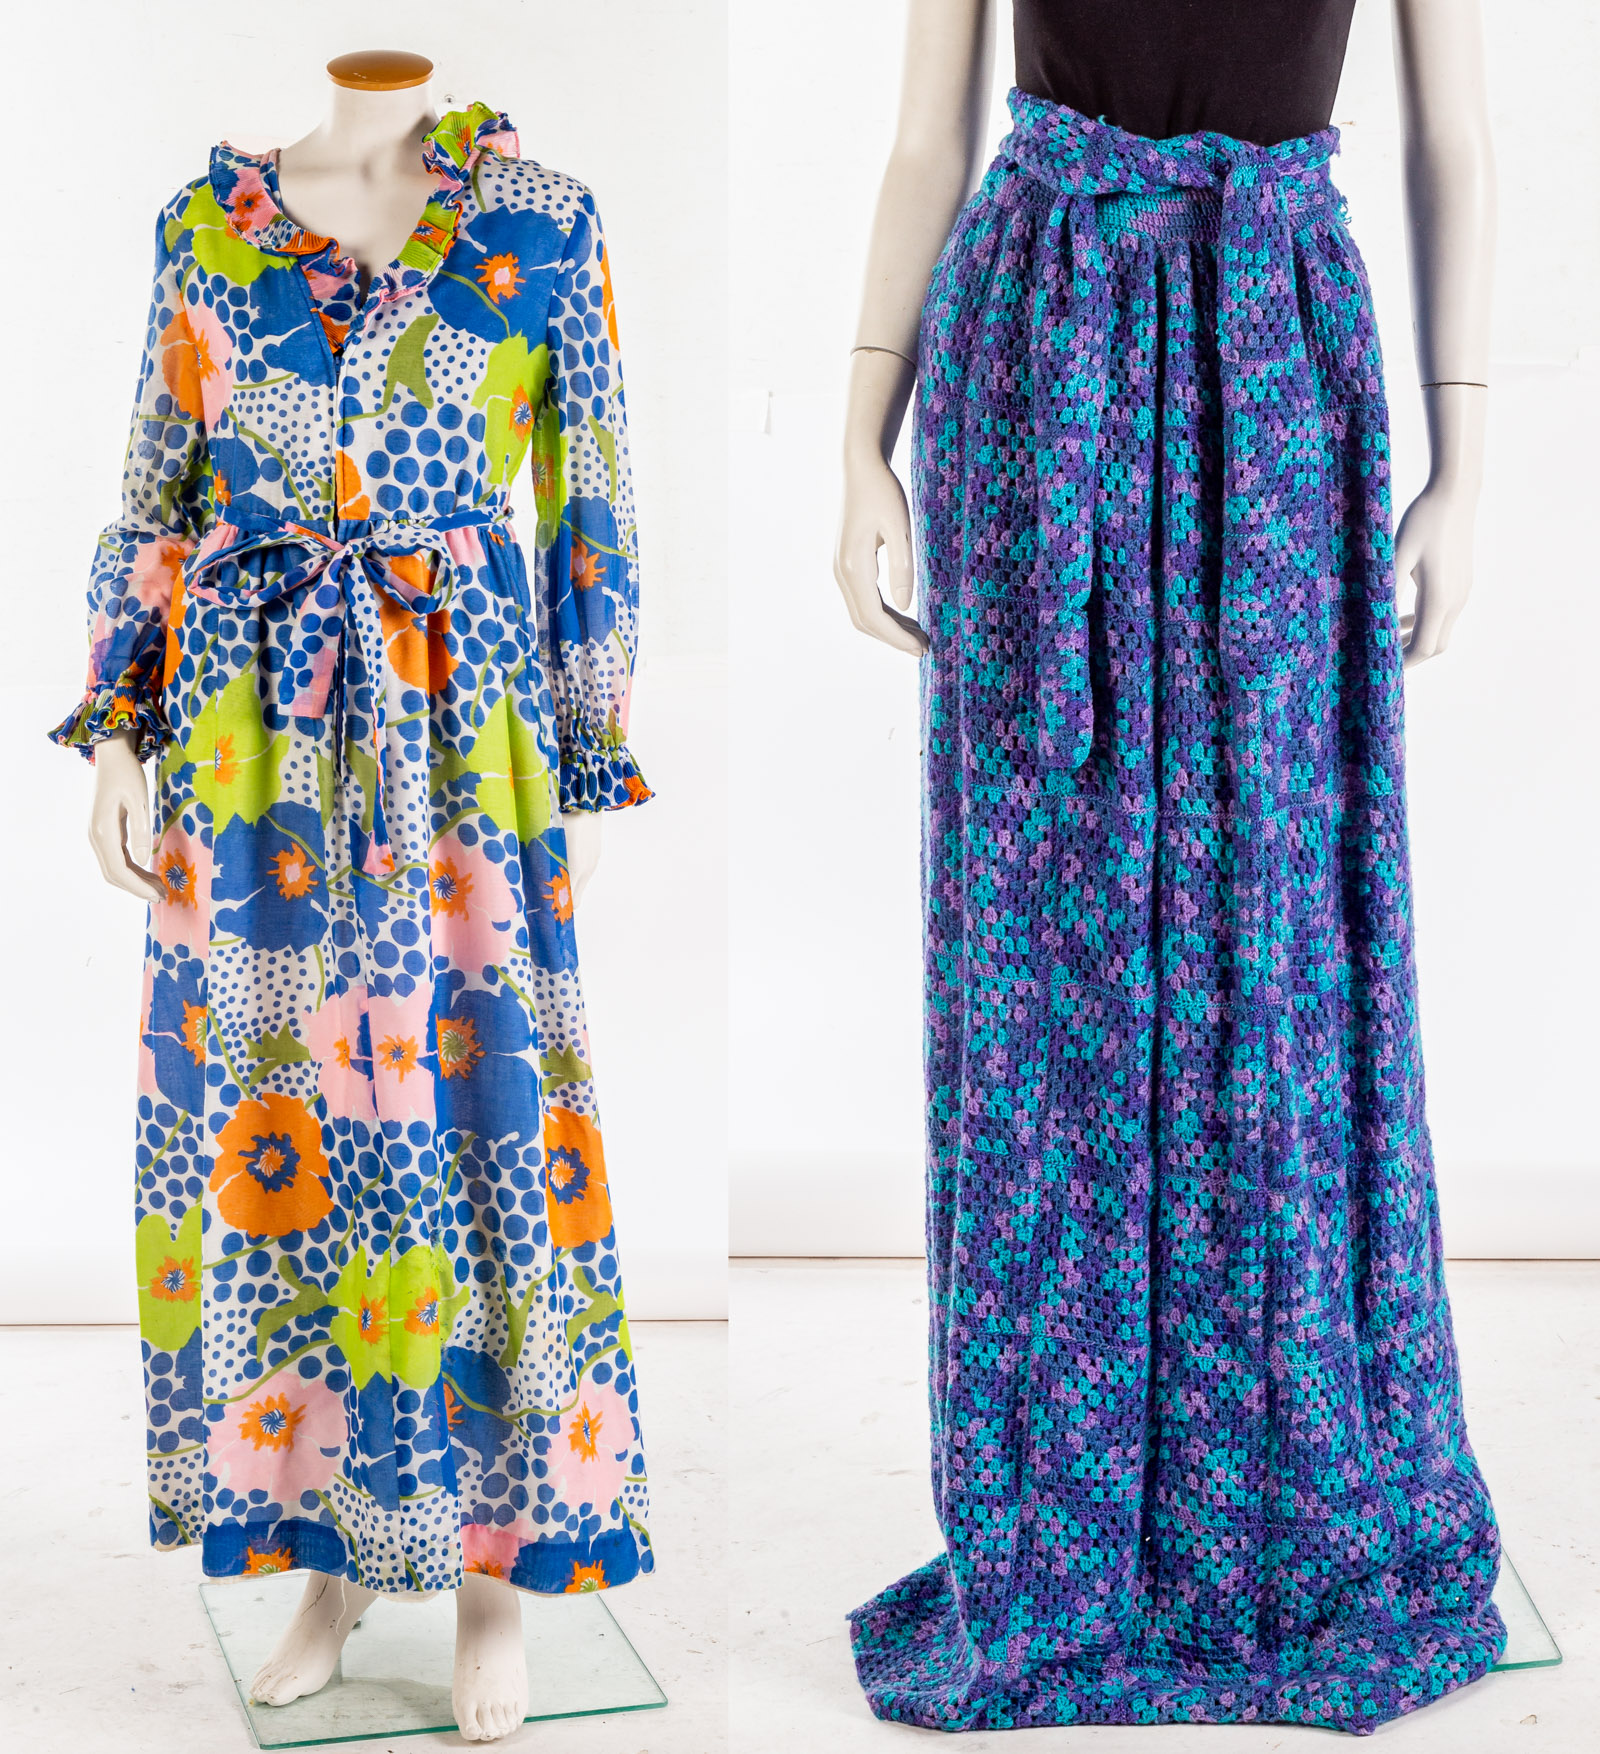 VINTAGE COTTON MAXI DRESS & KNITTED